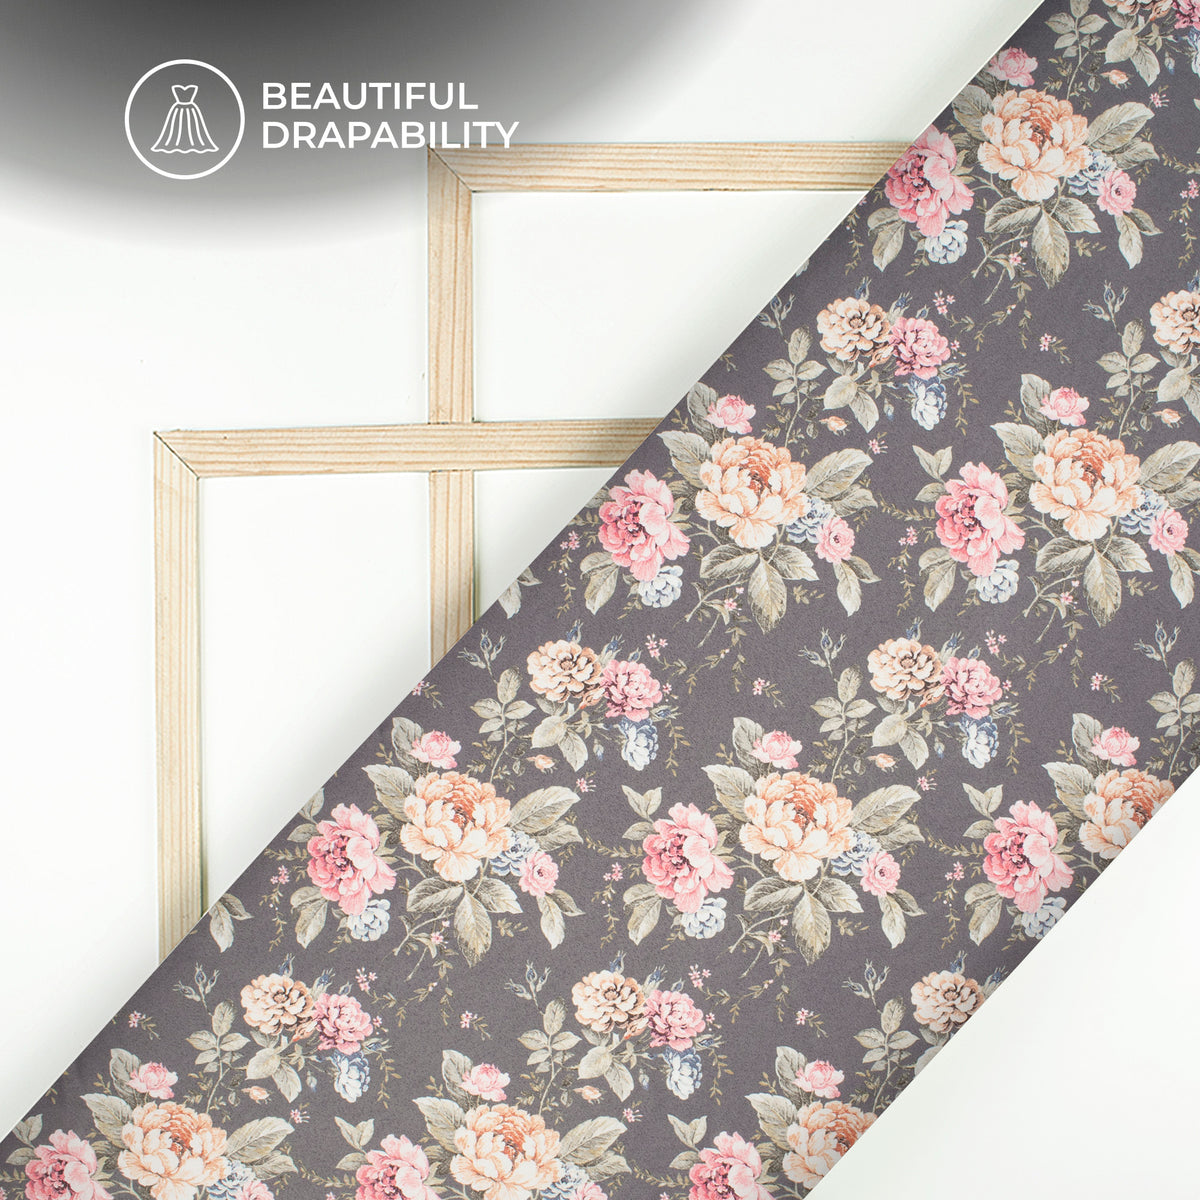 Pewter Grey Floral Digital Print Charmeuse Satin Fabric (Width 58 Inches)